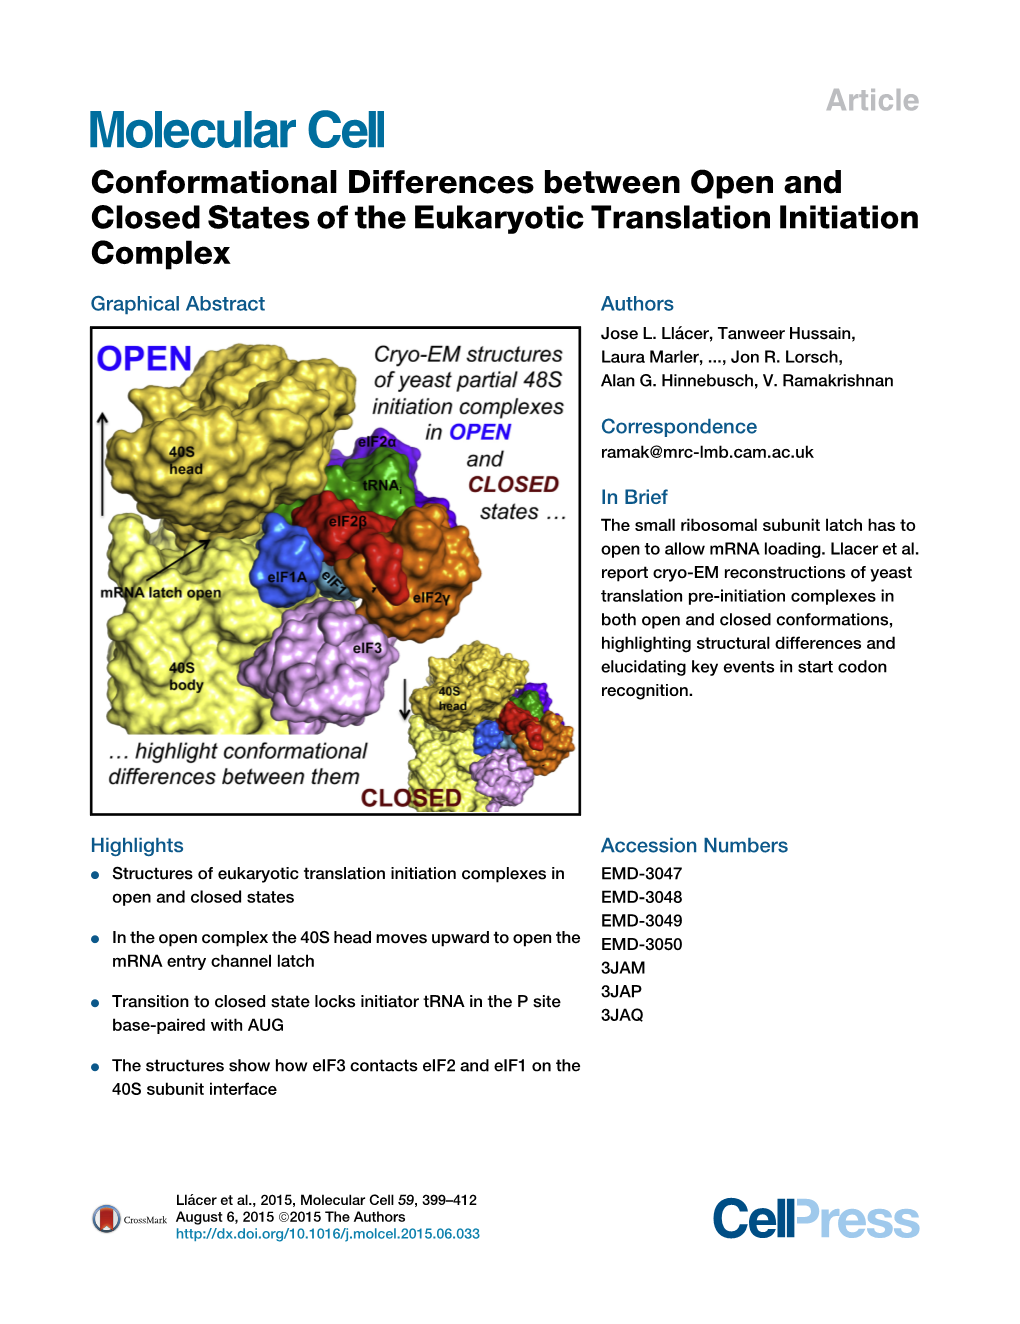 Conformational Differences Between Open and Closed States of the Eukaryotic Translation Initiation Complex